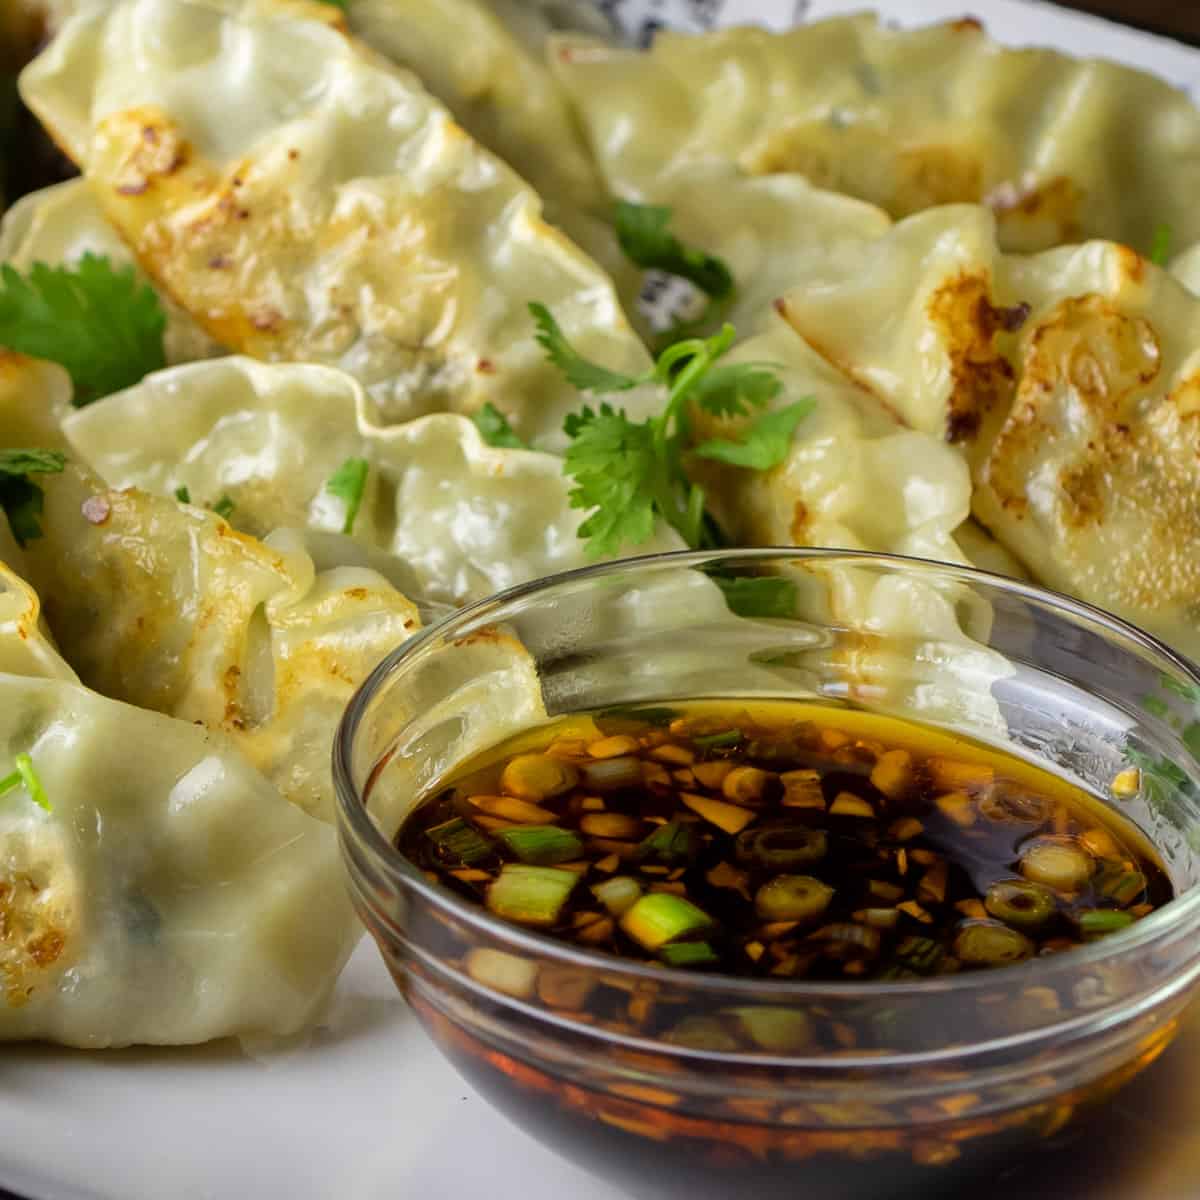 Dipping sauce in a small glass bowl in front of a plate of fried dumplings.